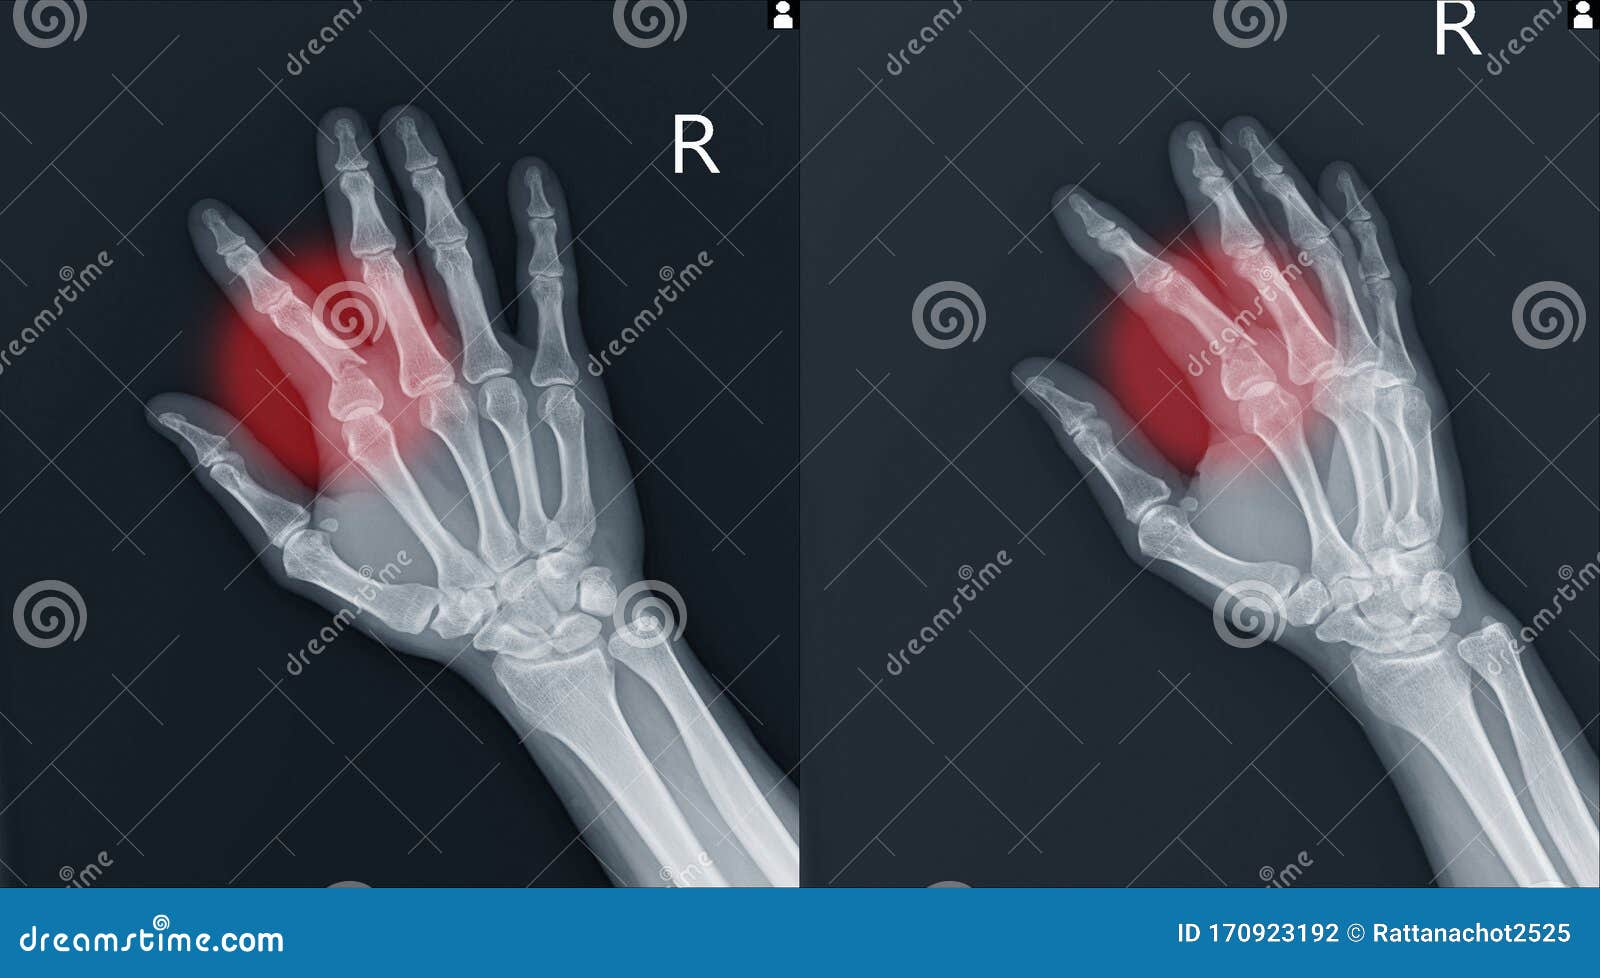 fracture index proximal phalanx showing x-ray hand.